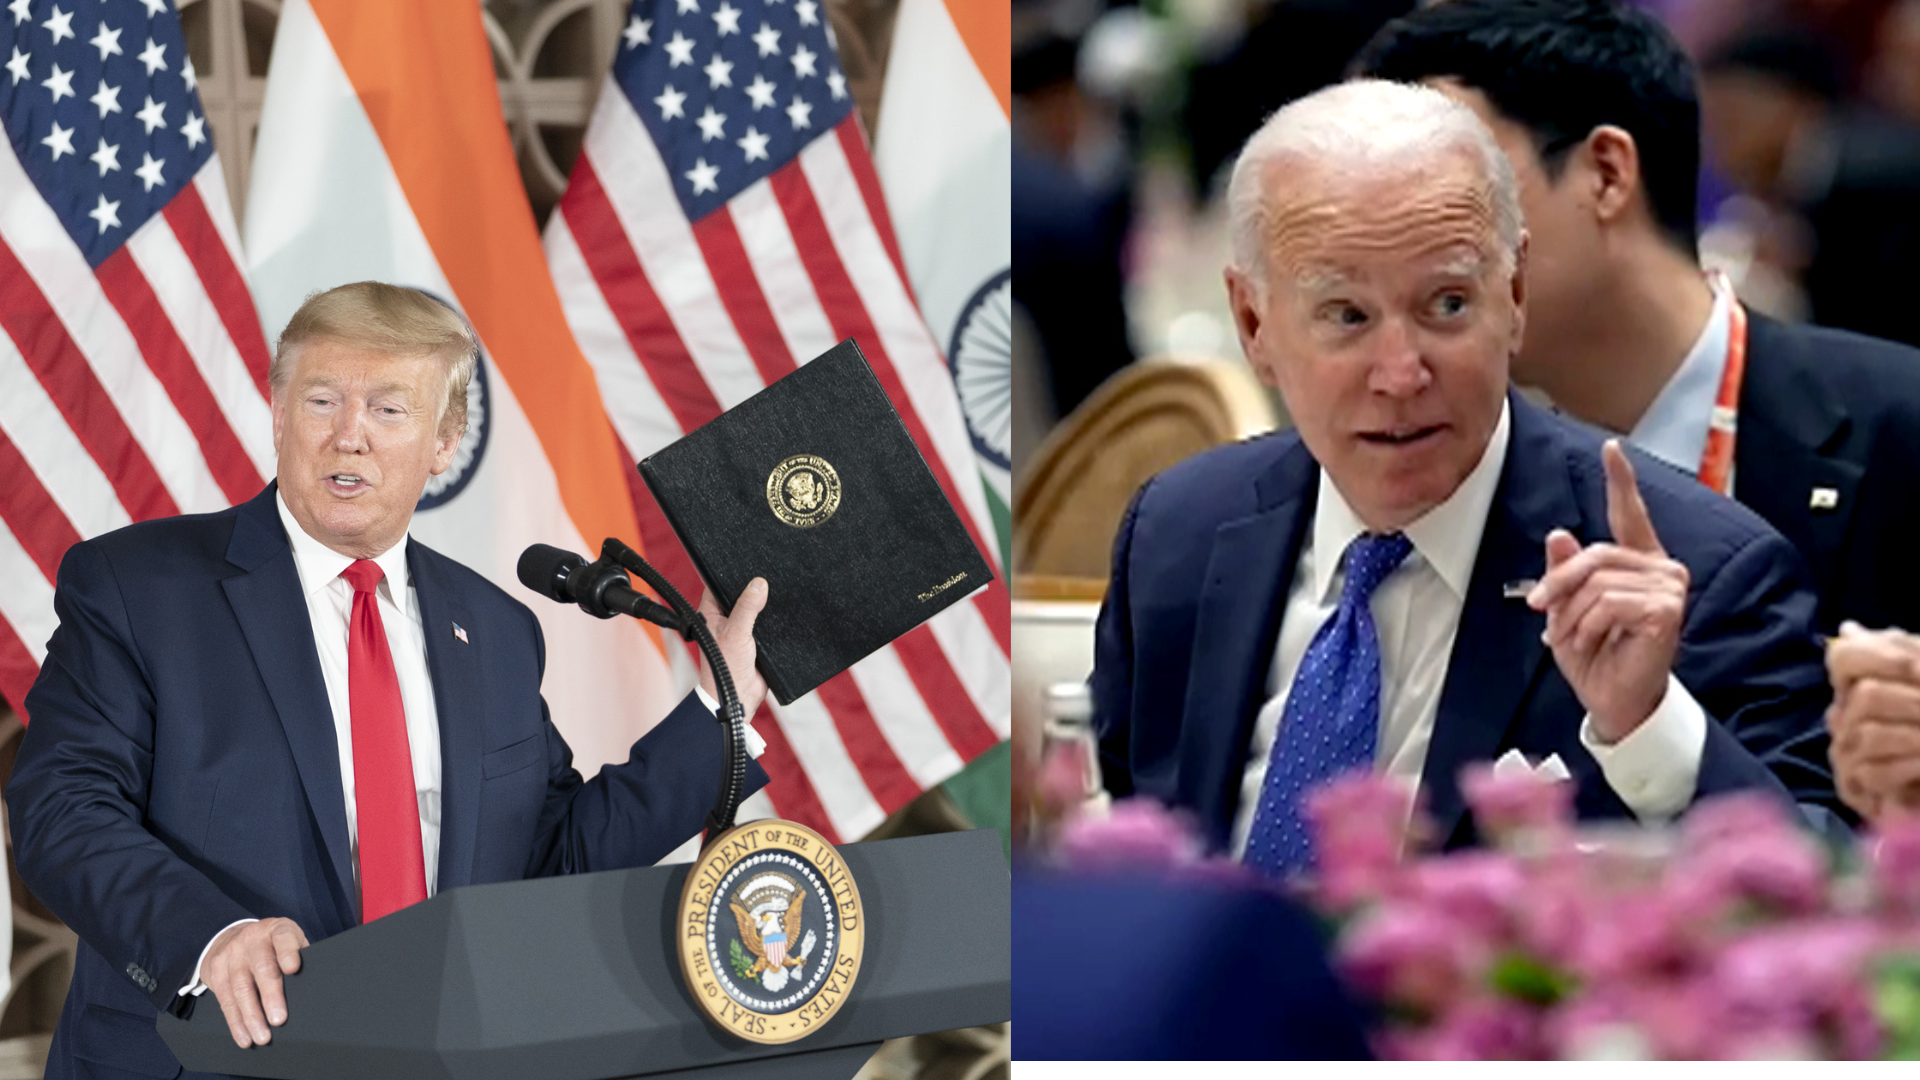 Biden And Trump Secure Presidential Nominations, Paving The Way For Another General Election Faceoff